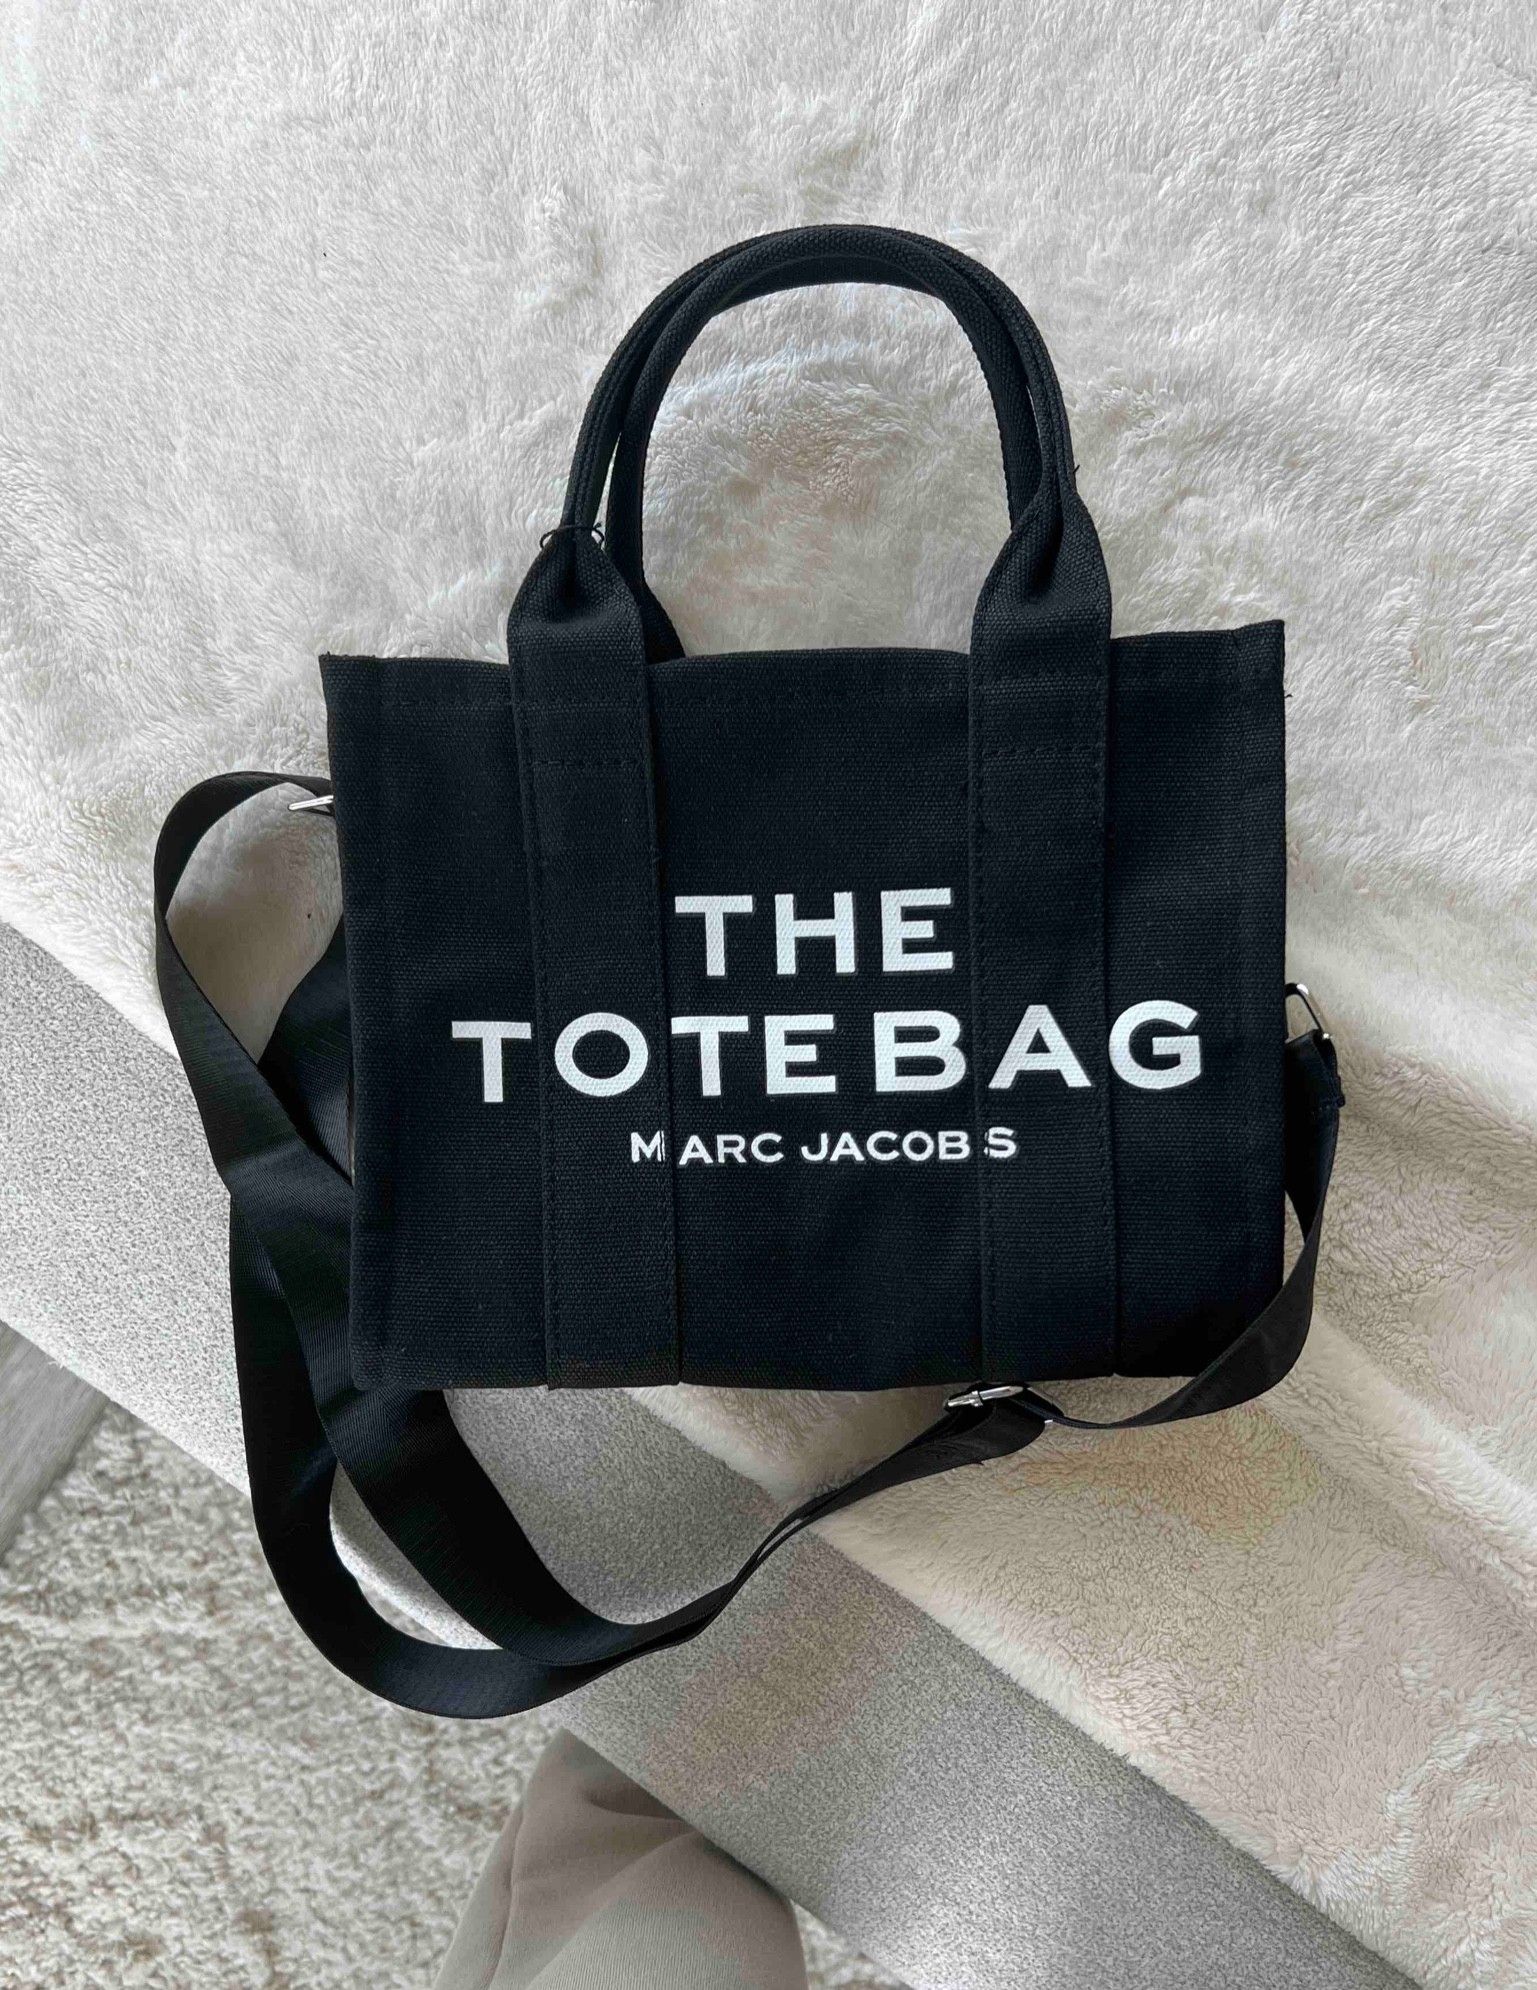 Chic and Functional: Stylish Tote Bag Designs for Every Occasion